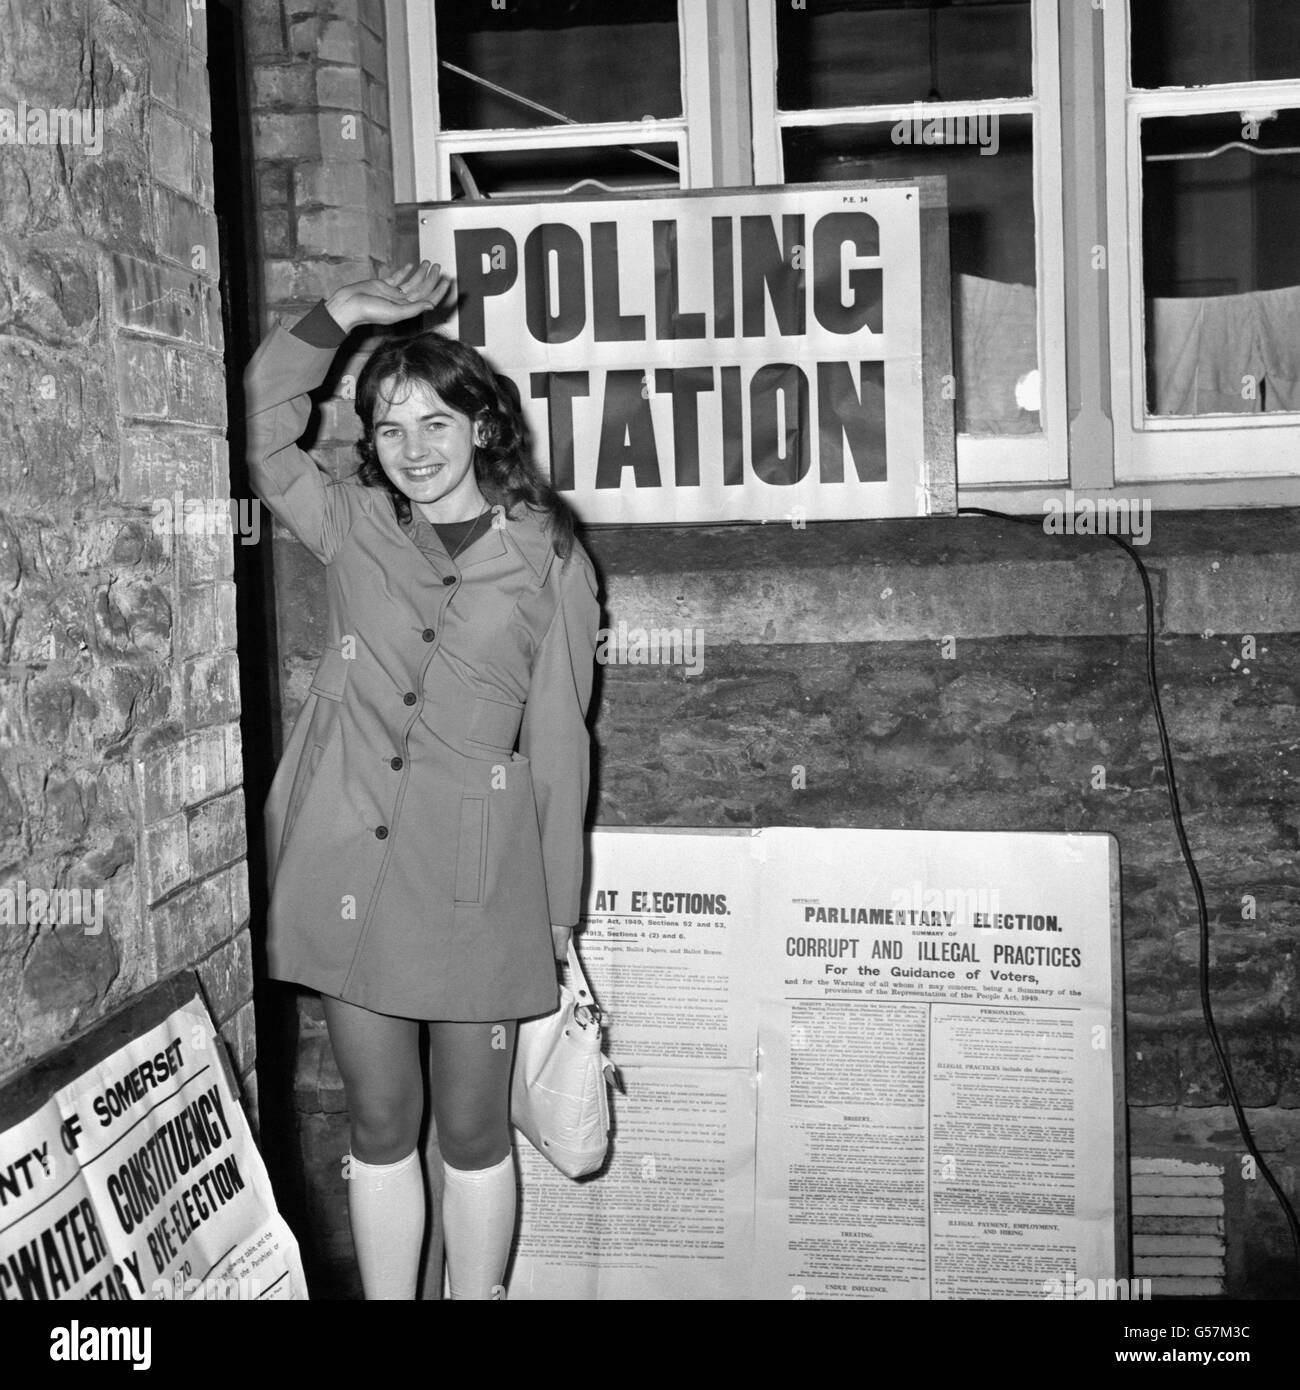 British electoral history was made at The Bridgwater election on March 12th, 1970. This was the first election to take place since the minimum voting age was reduced from 21 to 18, on January 1st 1970. A cheery salute to British electoral history from 18 year old typist Trudy Sellick of North Newton, Somerset, pictured at the polling station in North Newton where she voted this morning at 7am as the station opened. Stock Photo